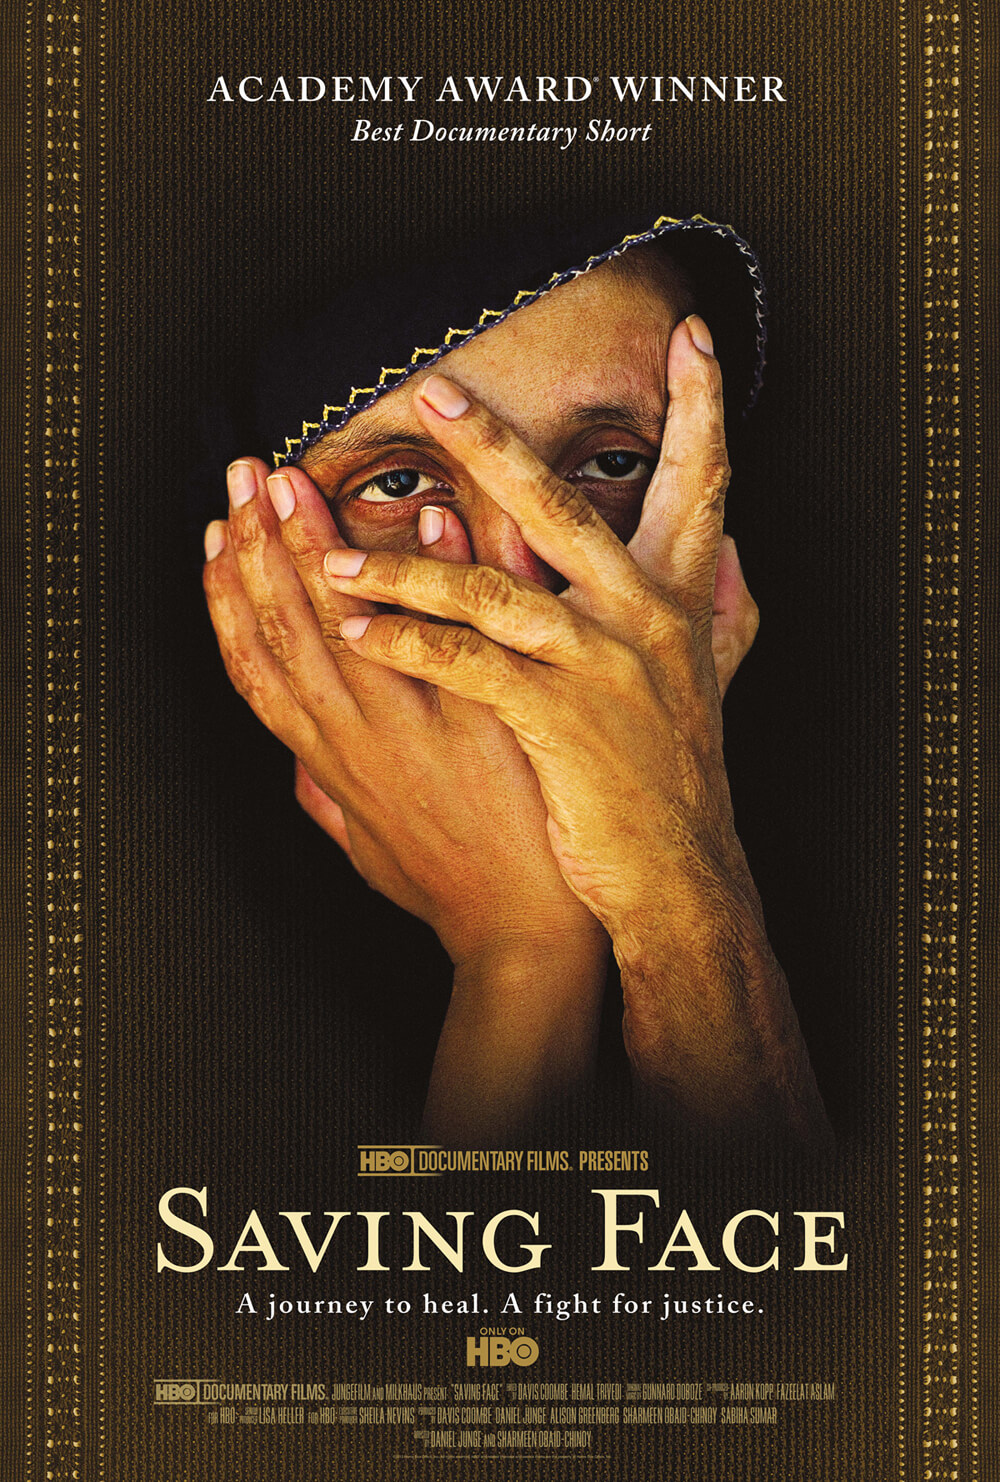 Poster of Saving Face. A woman covers her face with her hands, only her eyes are visible. At the top of the poster there is a text that says "Academy Award Winner" and at the bottom the film's title and an HBO logo.